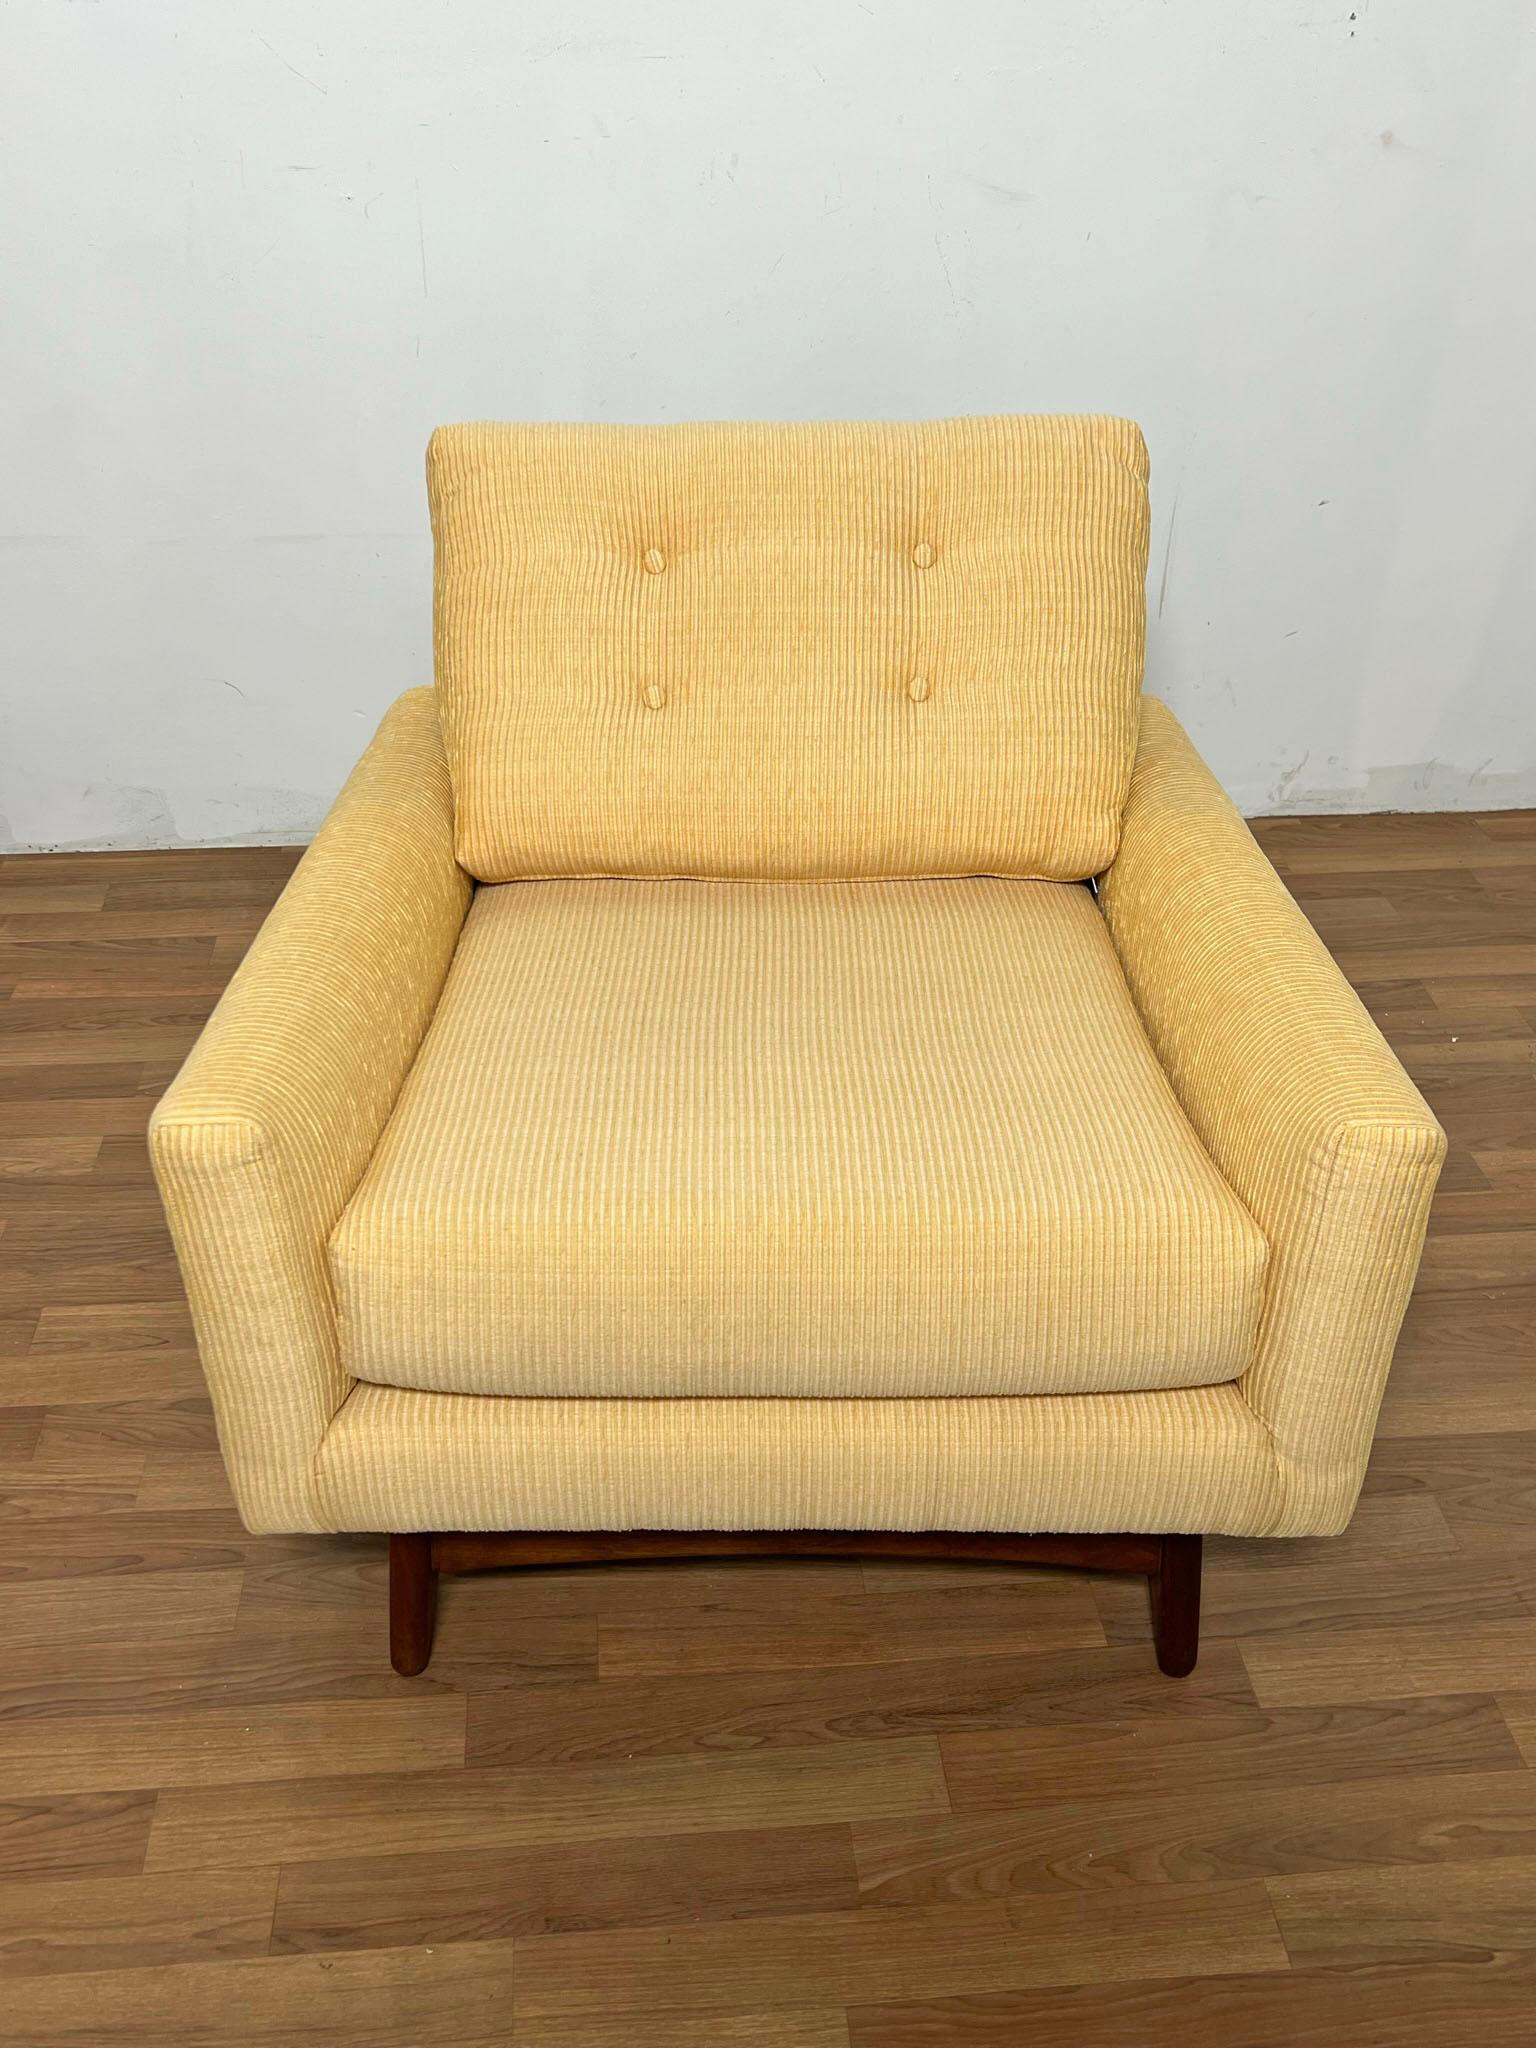 Adrian Pearsall for Craft Associates Lounge Chair and Ottoman, circa 1960s For Sale 2